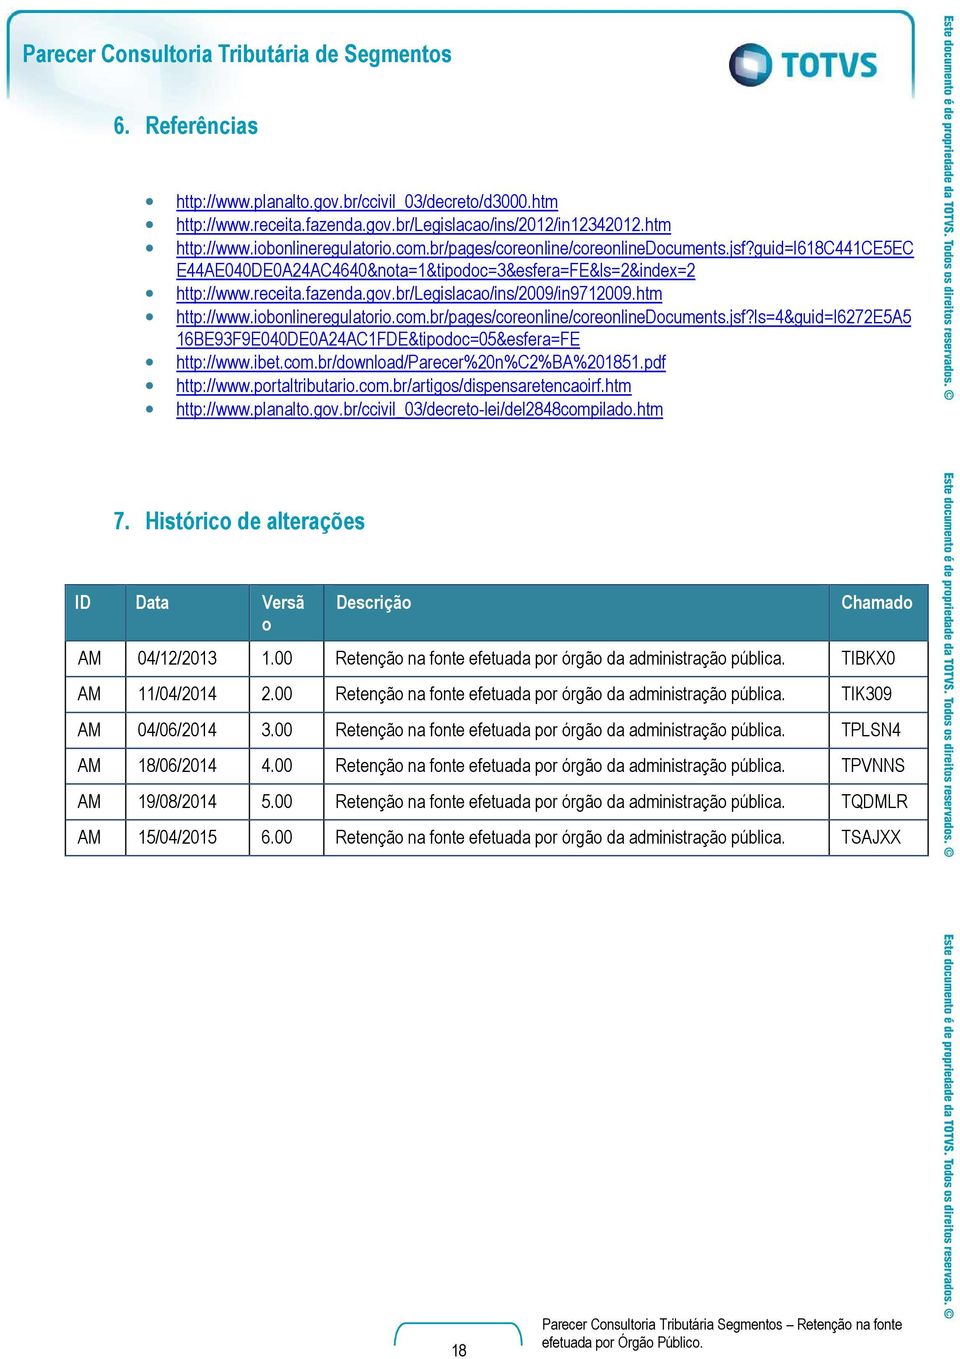 htm http://www.iobonlineregulatorio.com.br/pages/coreonline/coreonlinedocuments.jsf?ls=4&guid=i6272e5a5 16BE93F9E040DE0A24AC1FDE&tipodoc=05&esfera=FE http://www.ibet.com.br/download/parecer%20n%c2%ba%201851.